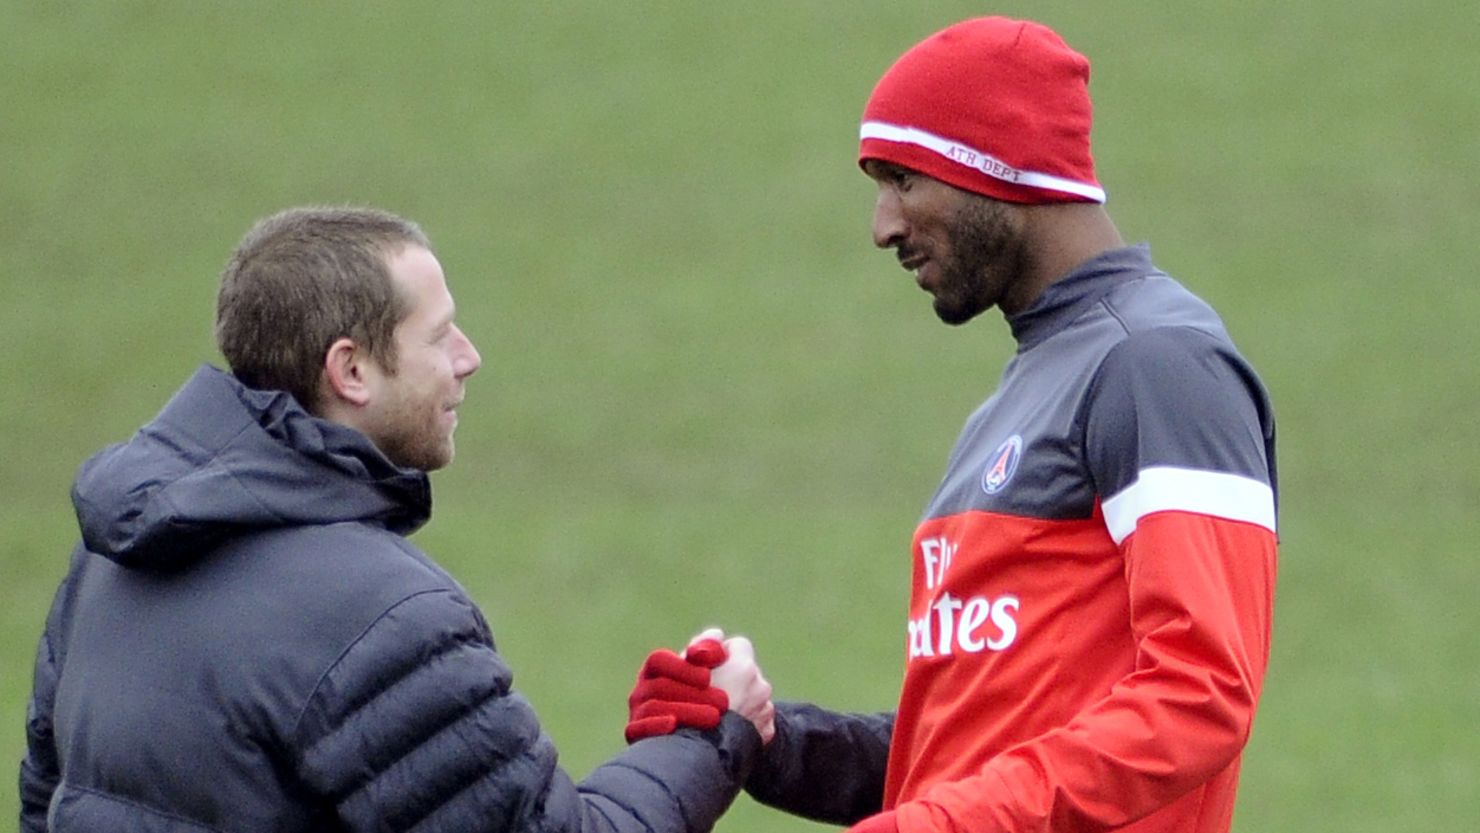 Former France international Nicolas Anelka, right, has been training with one of his former clubs, Paris Saint-Germain.